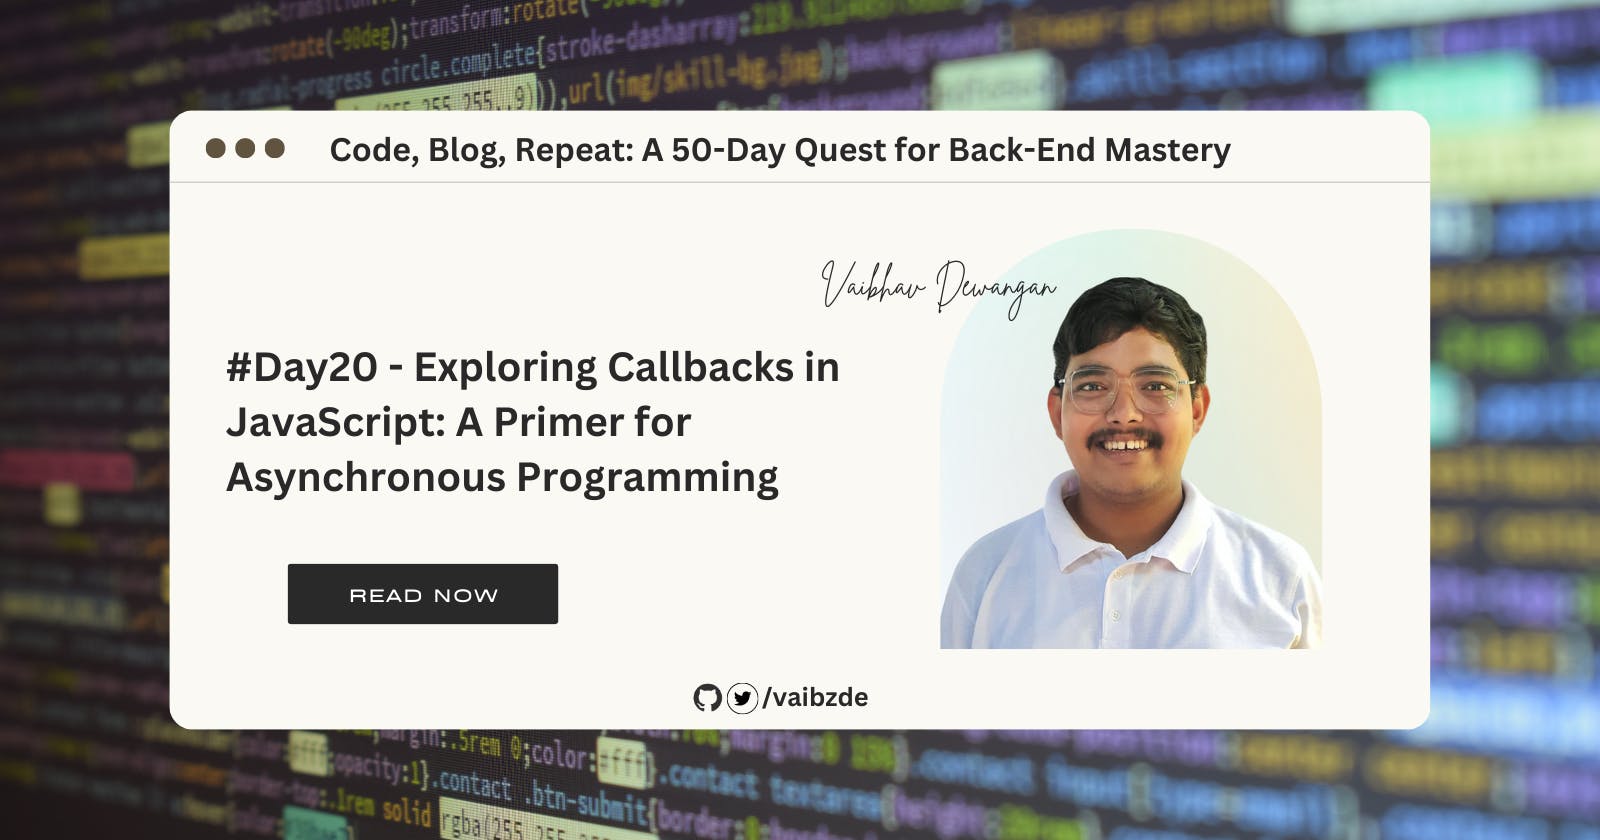 #Day20 - Exploring Callbacks in JavaScript: A Primer for Asynchronous Programming